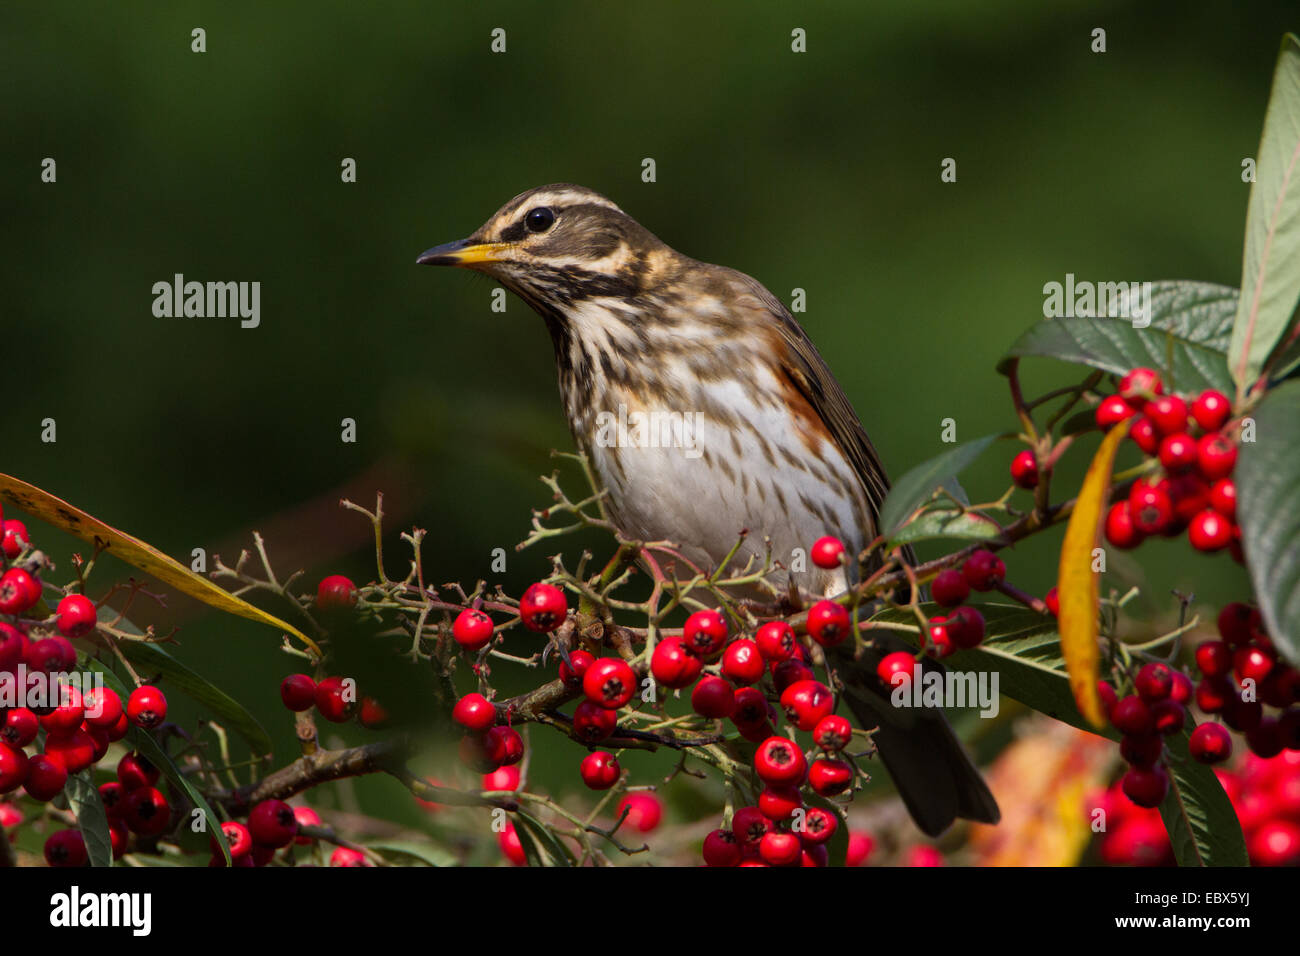 Redwing (Turdus iliacus) feeding from a cotoneaster hedge full of red berries, in Worcestershire, England, UK. Stock Photo